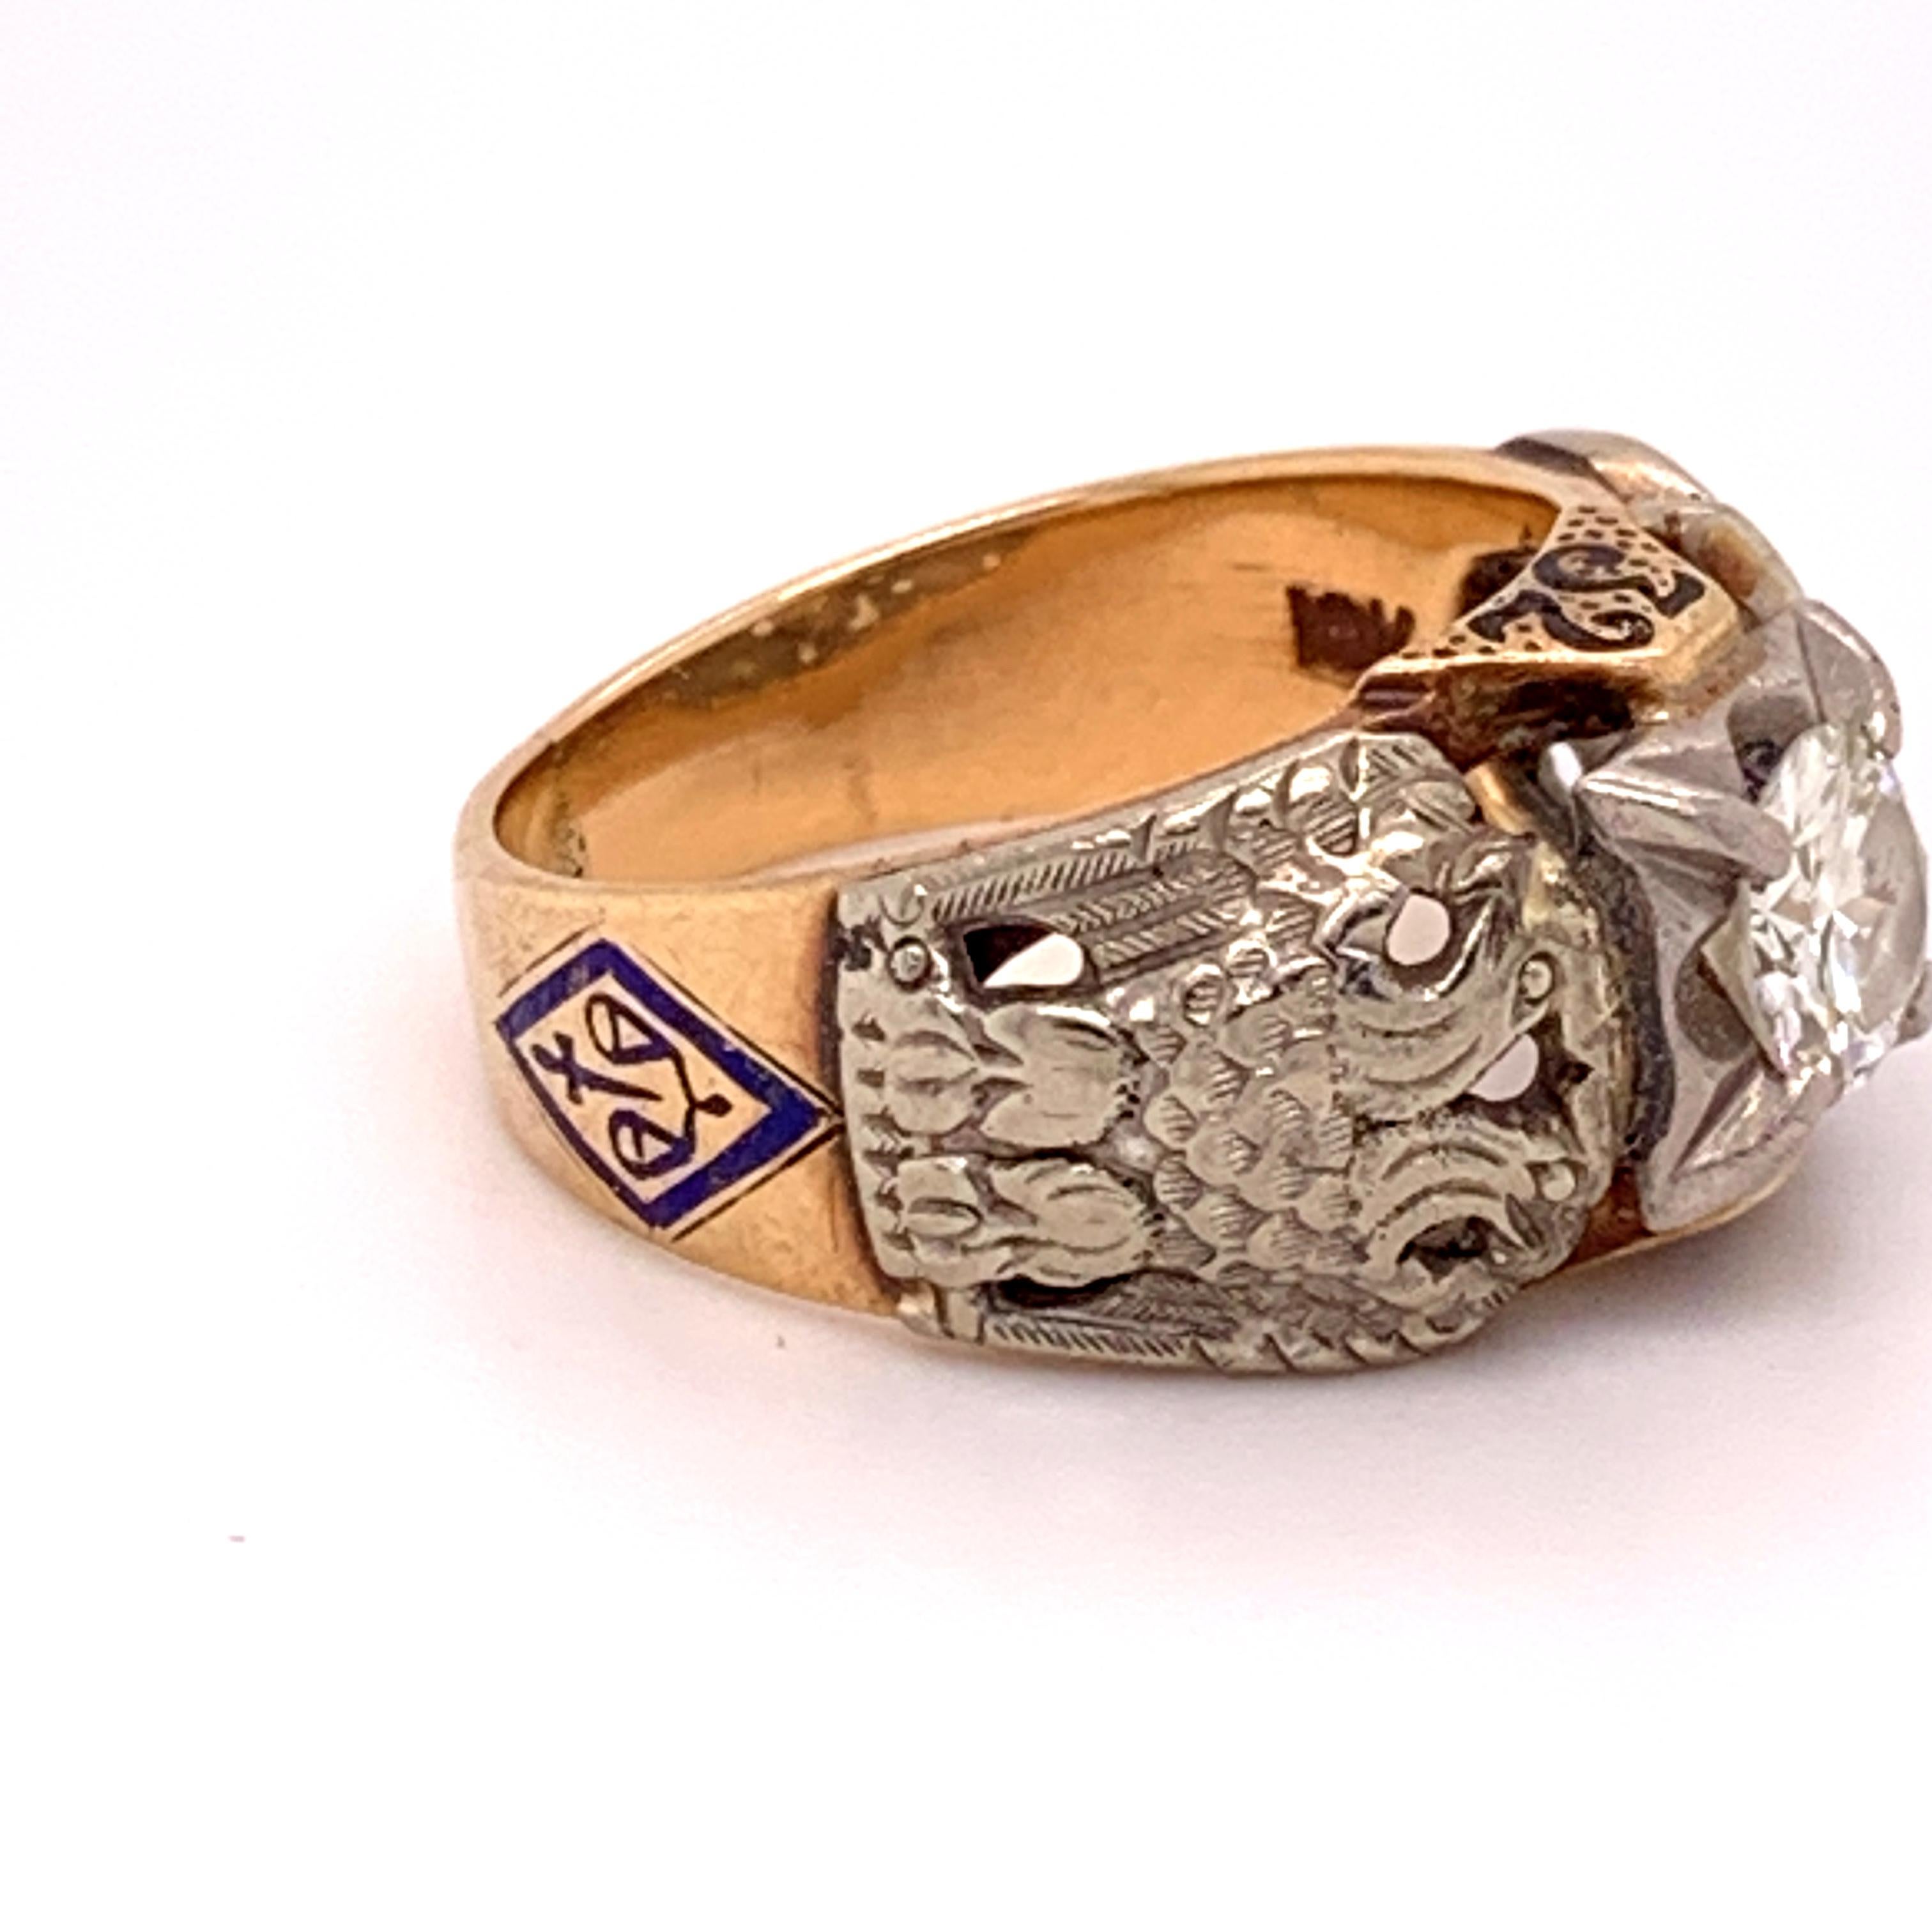 Masonic 10k Yellow Gold Men's Ring .85ct Genuine Natural Diamond Eagle (#J4838)

10k yellow gold Masonic ring with applied white gold featuring a round brilliant cut diamond weighing about .85cts and measuring about 6mm. The diamond has GH color and